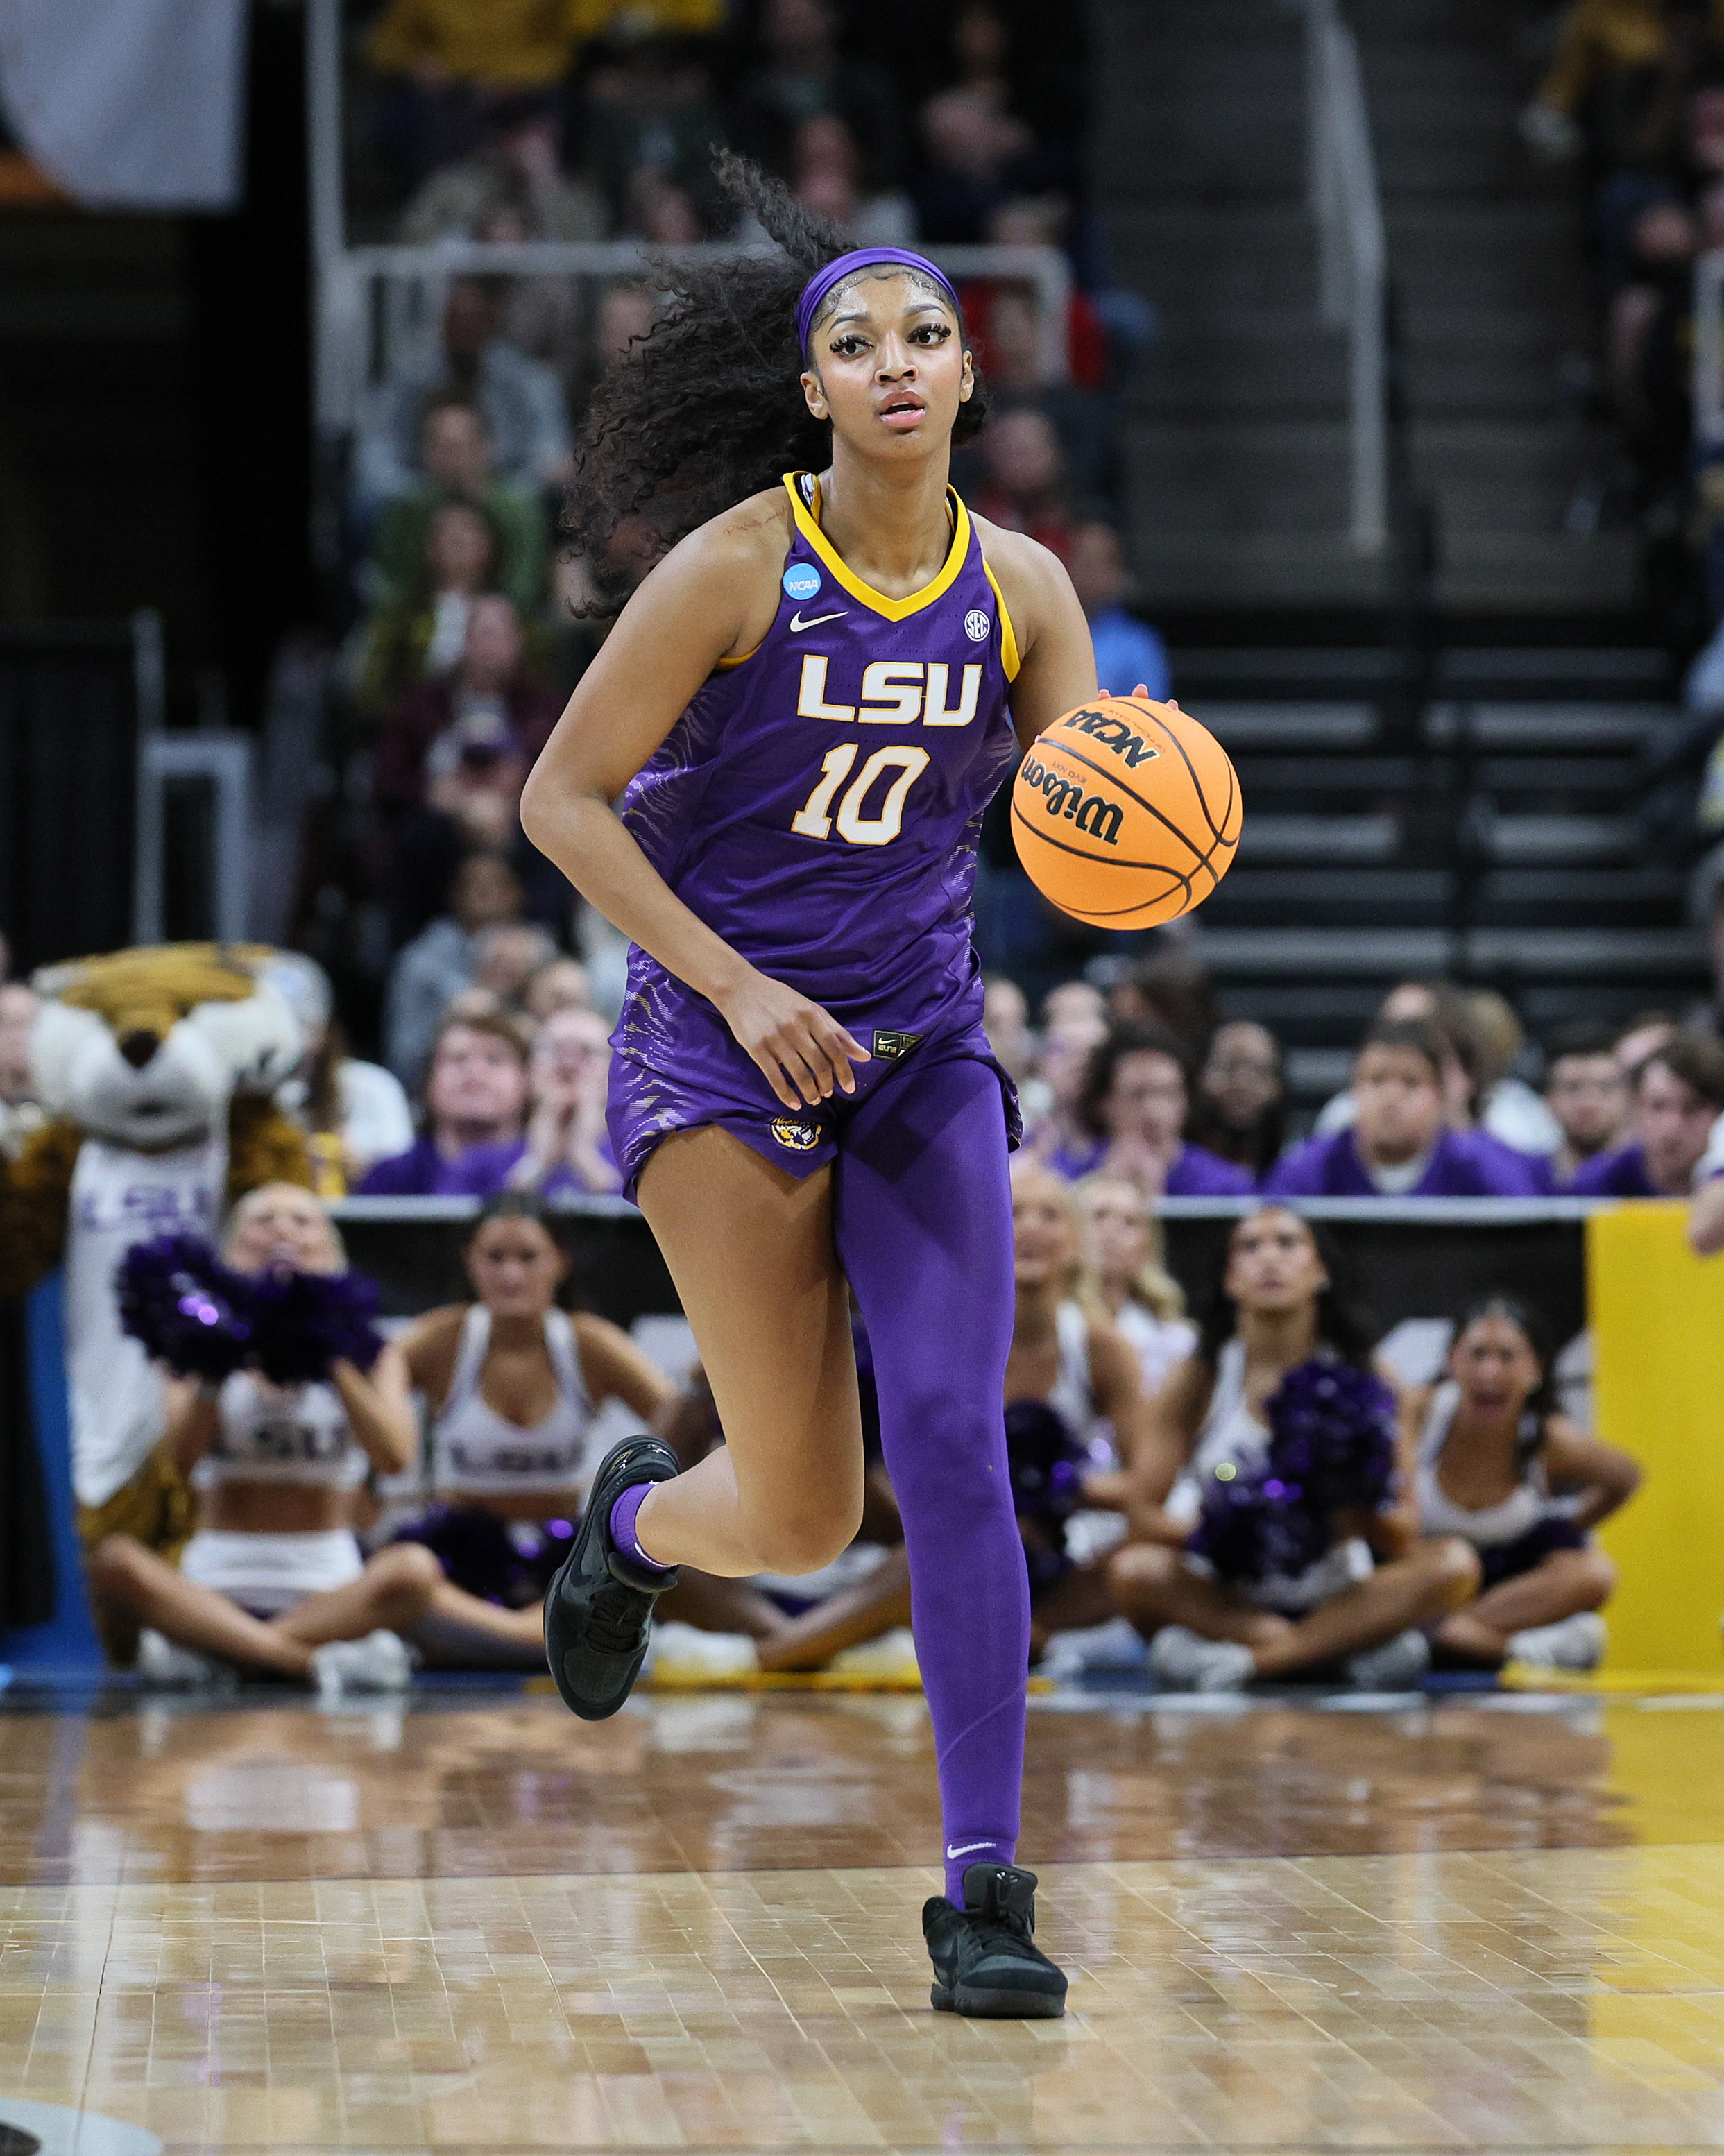 LSU women&#x27;s basketball player in action, dribbling the ball on the court during a game